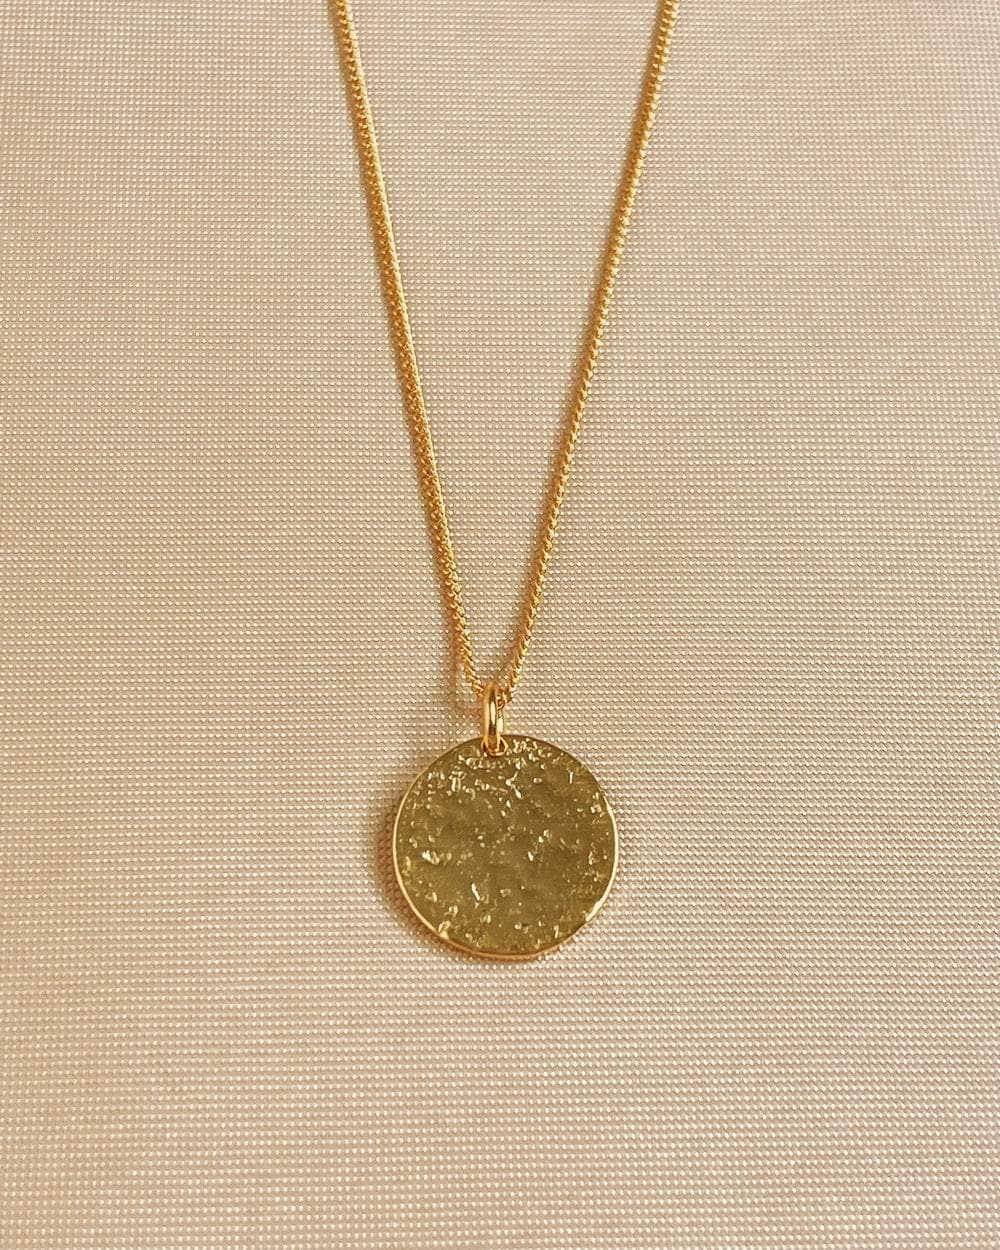 So Dainty Co. Necklaces Phoebe Gold Necklace Gold Plated 925 Sterling Silver Jewelry